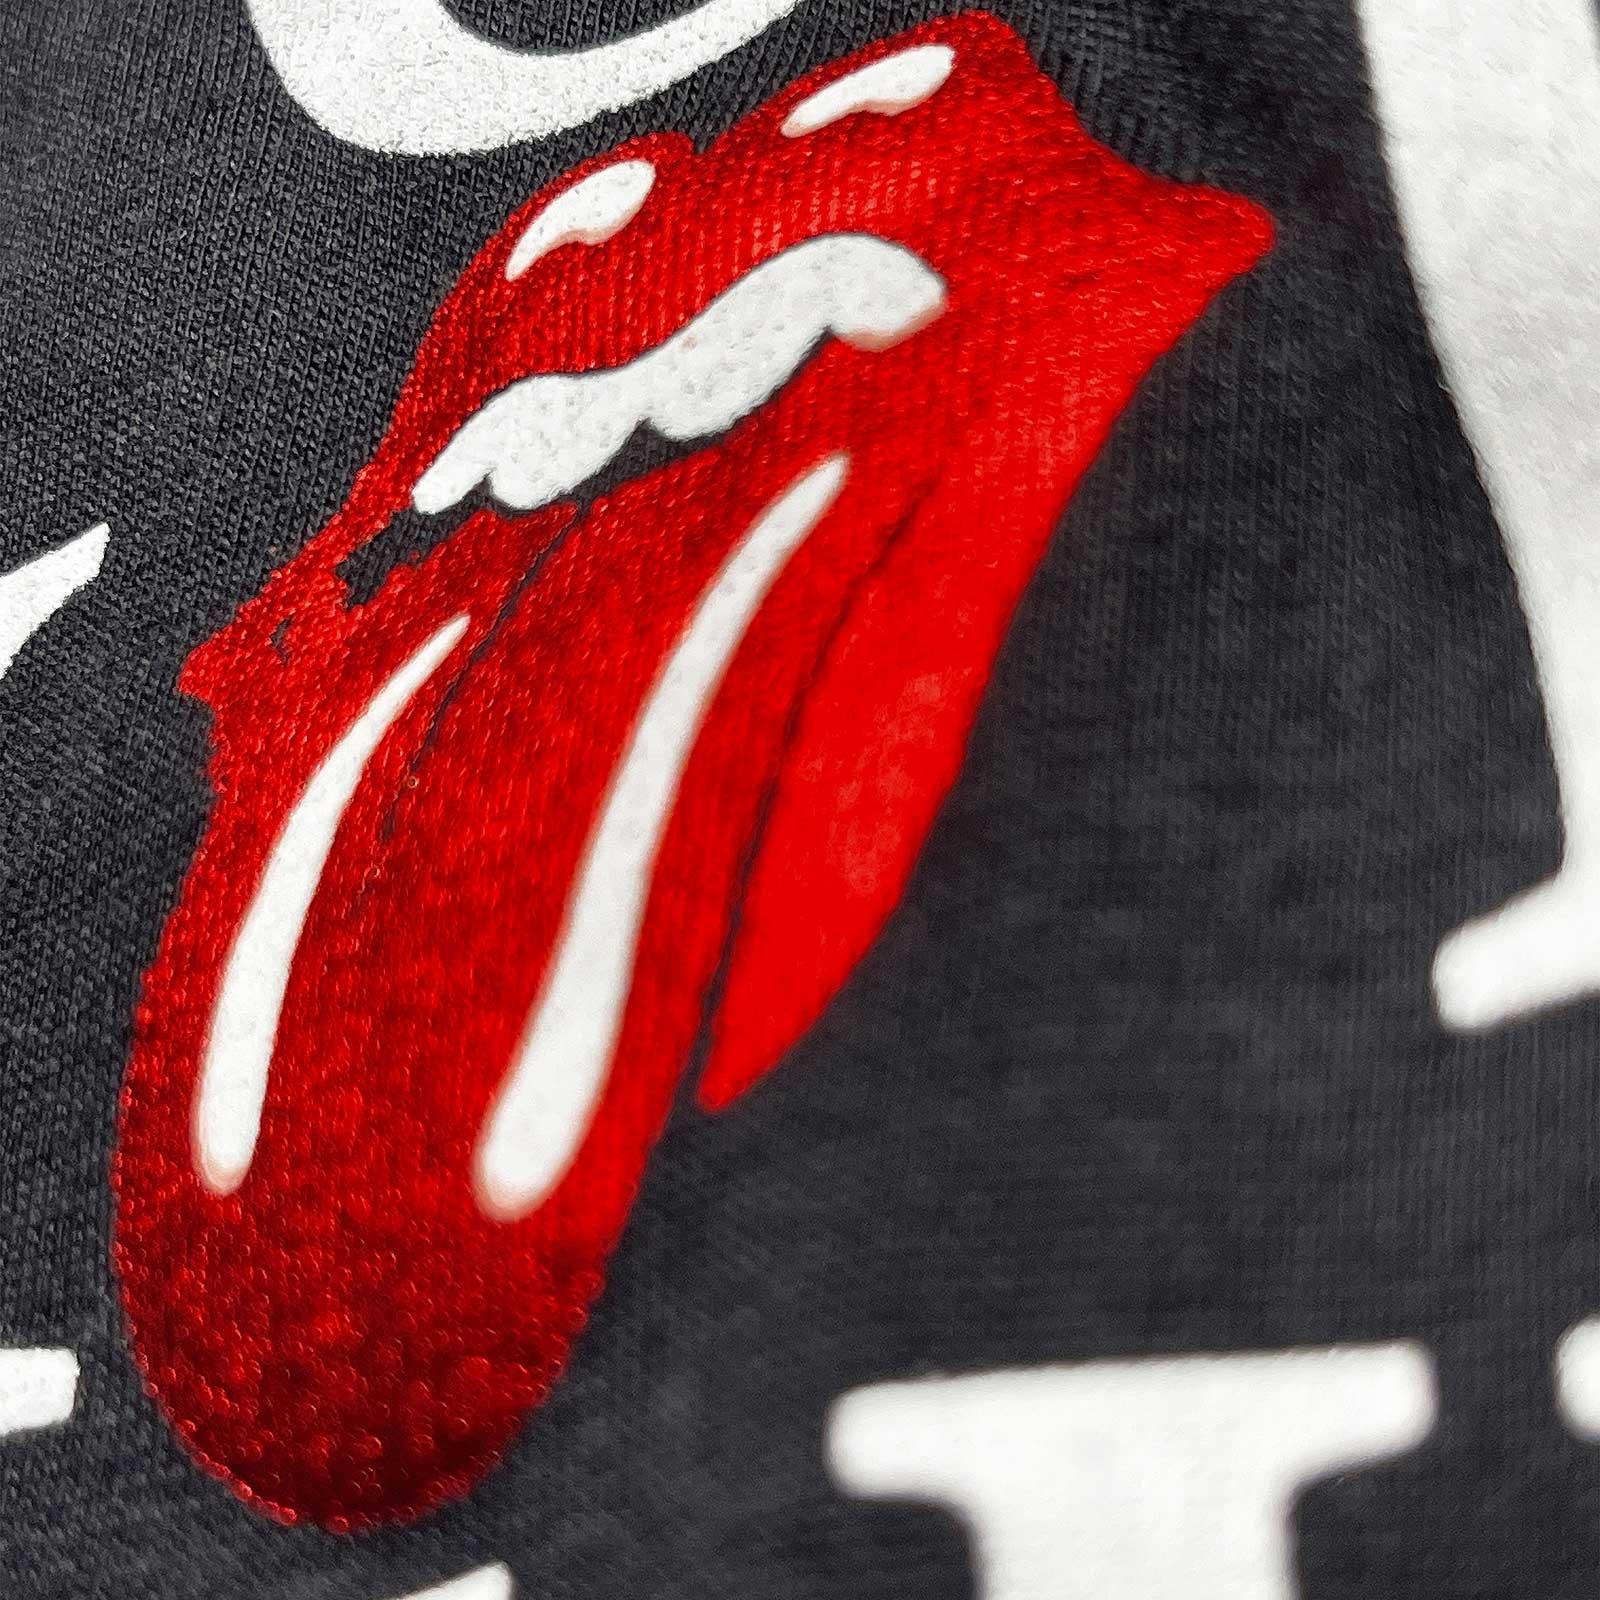 The Rolling Stones  It's Only R&R But I Like It TShirt 